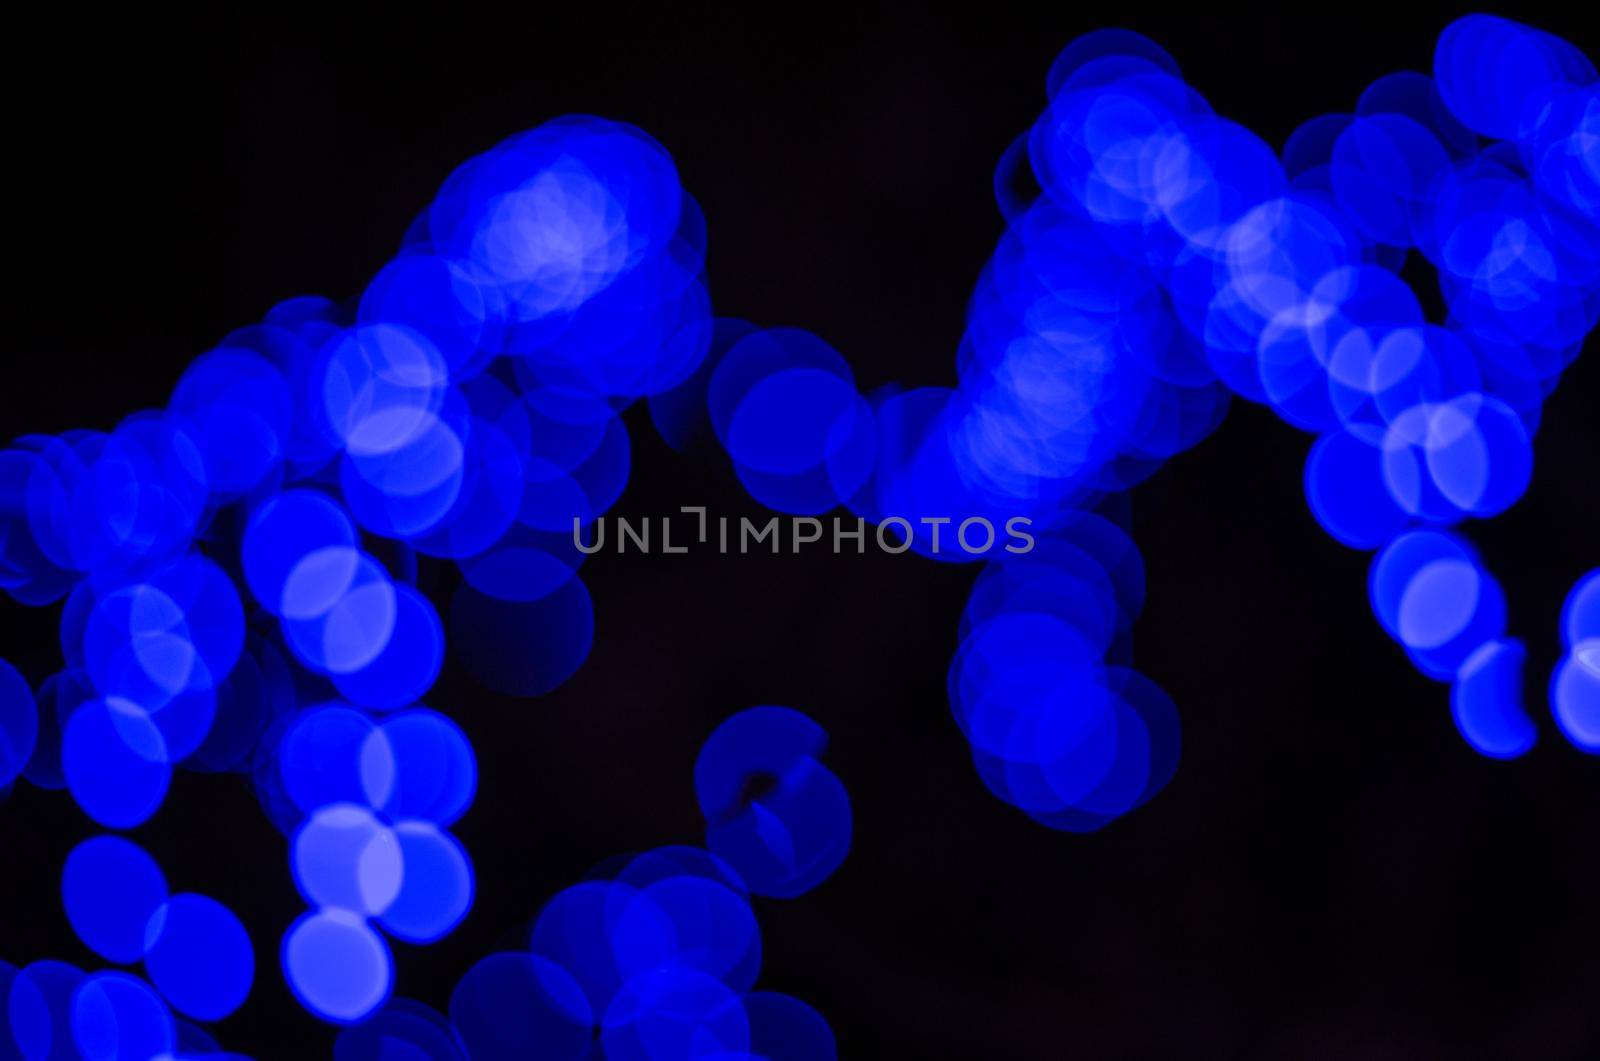 Blurred photo shows Illumination bulbs with blue colours. by gelog67